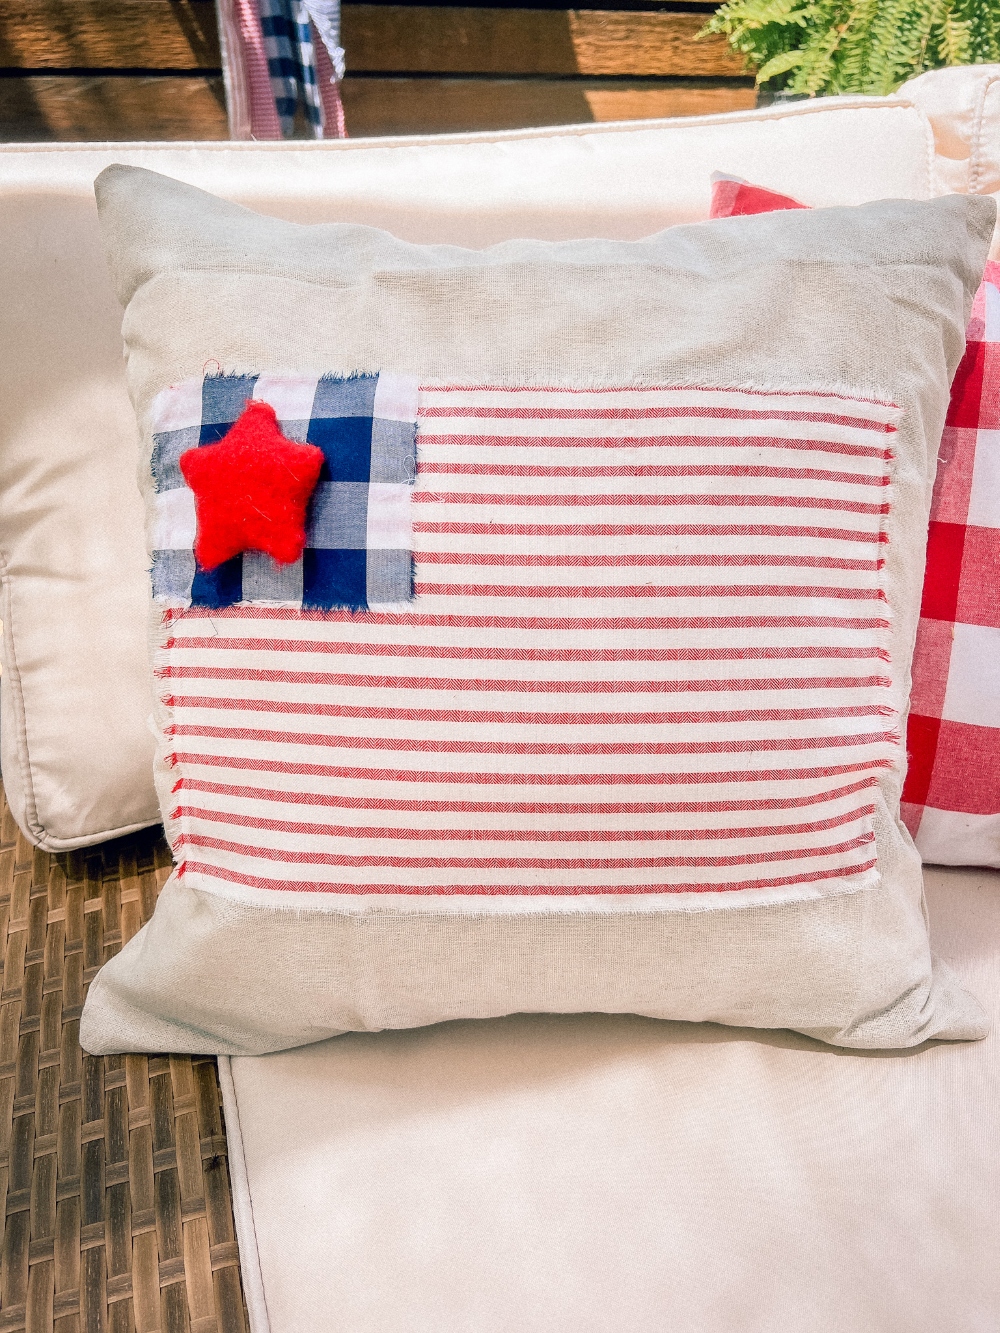 Two Easy Patriotic Pillow Covers. Add some summer patriotic charm to your home with these red white and blue no-sew pillow covers you can make in minutes!